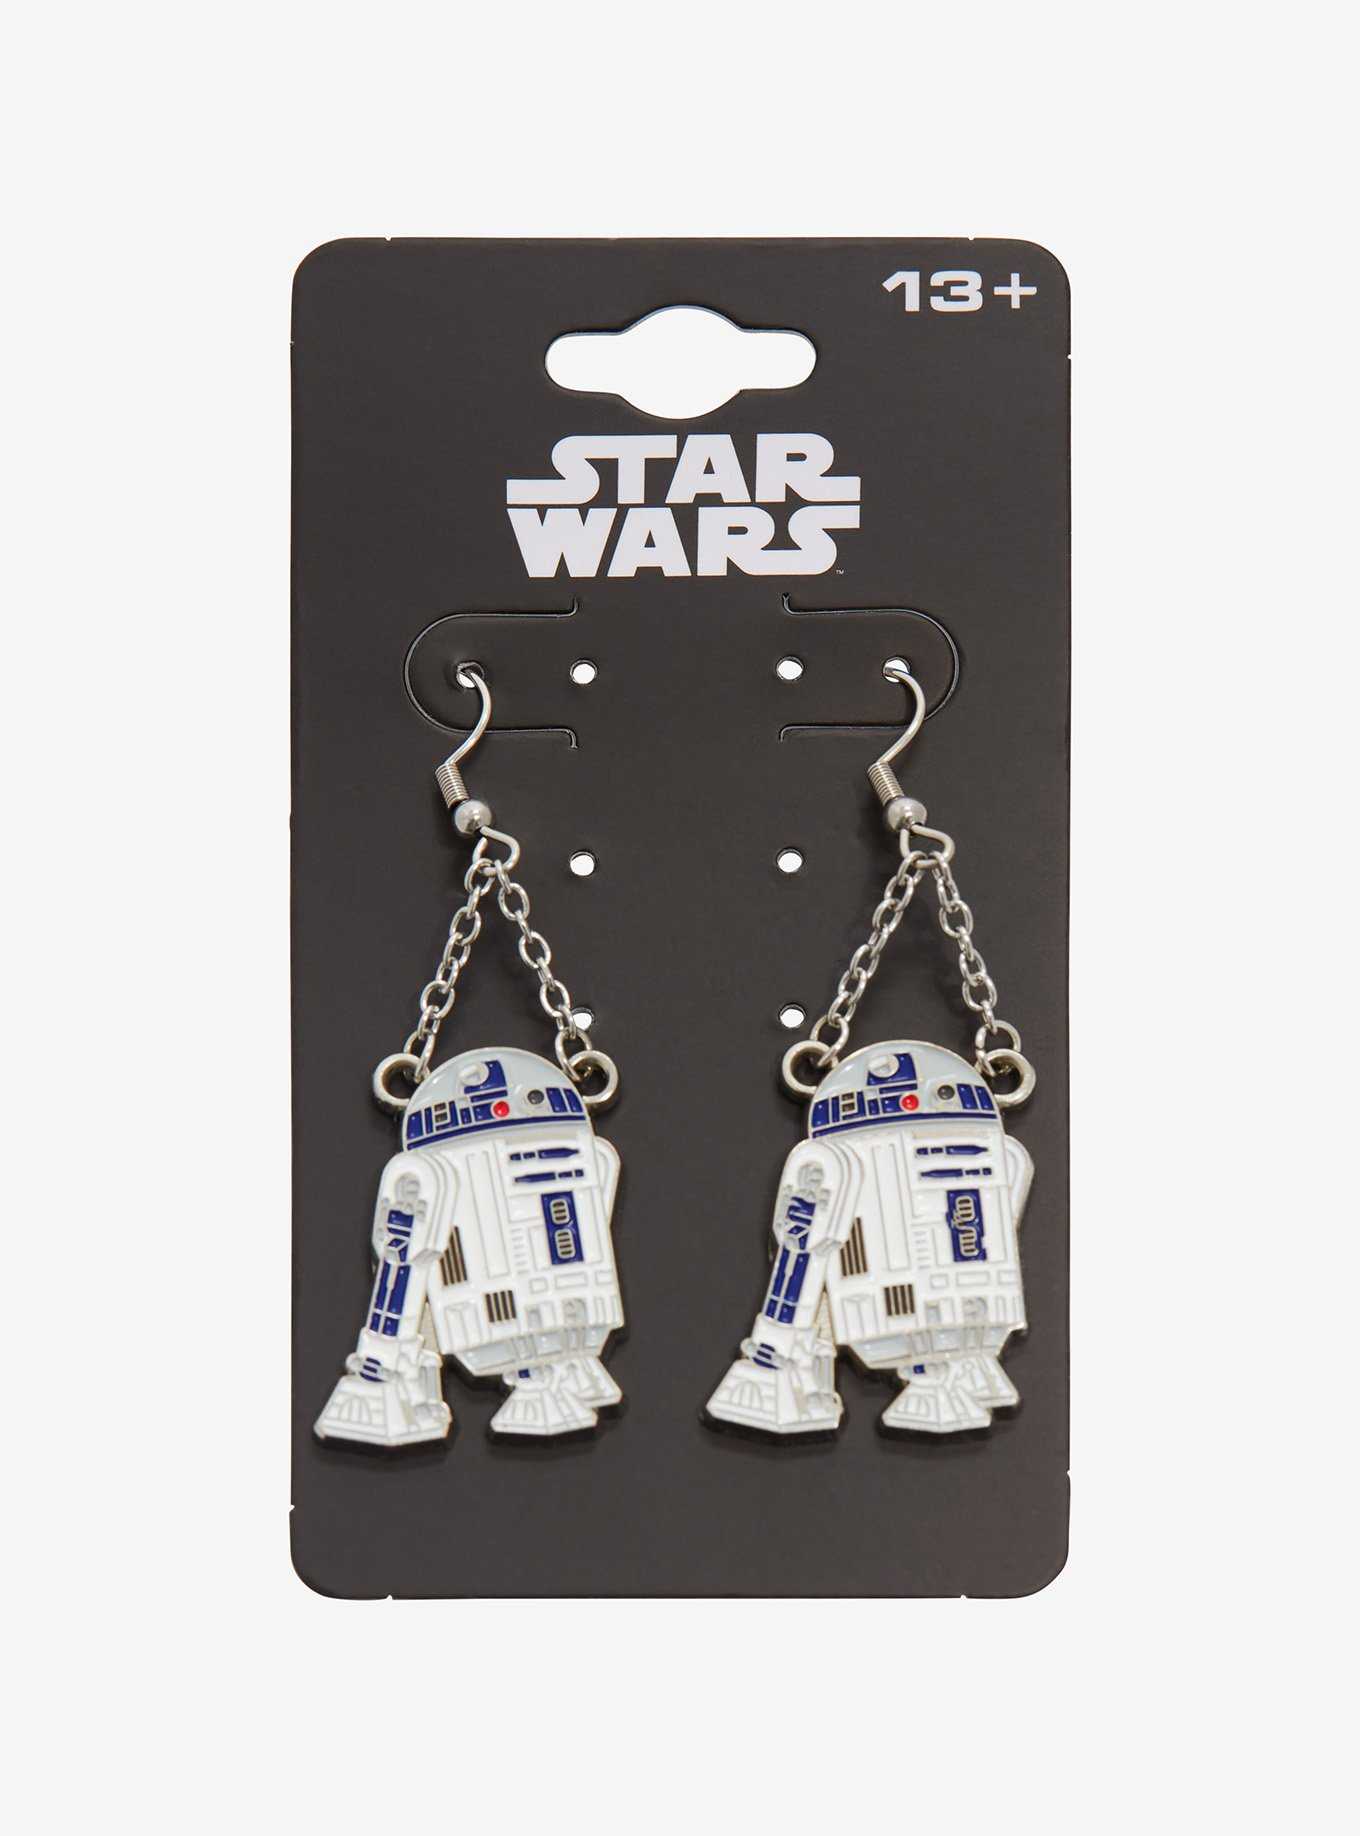 Star Wars R2-D2 Figural Earrings - BoxLunch Exclusive, , hi-res